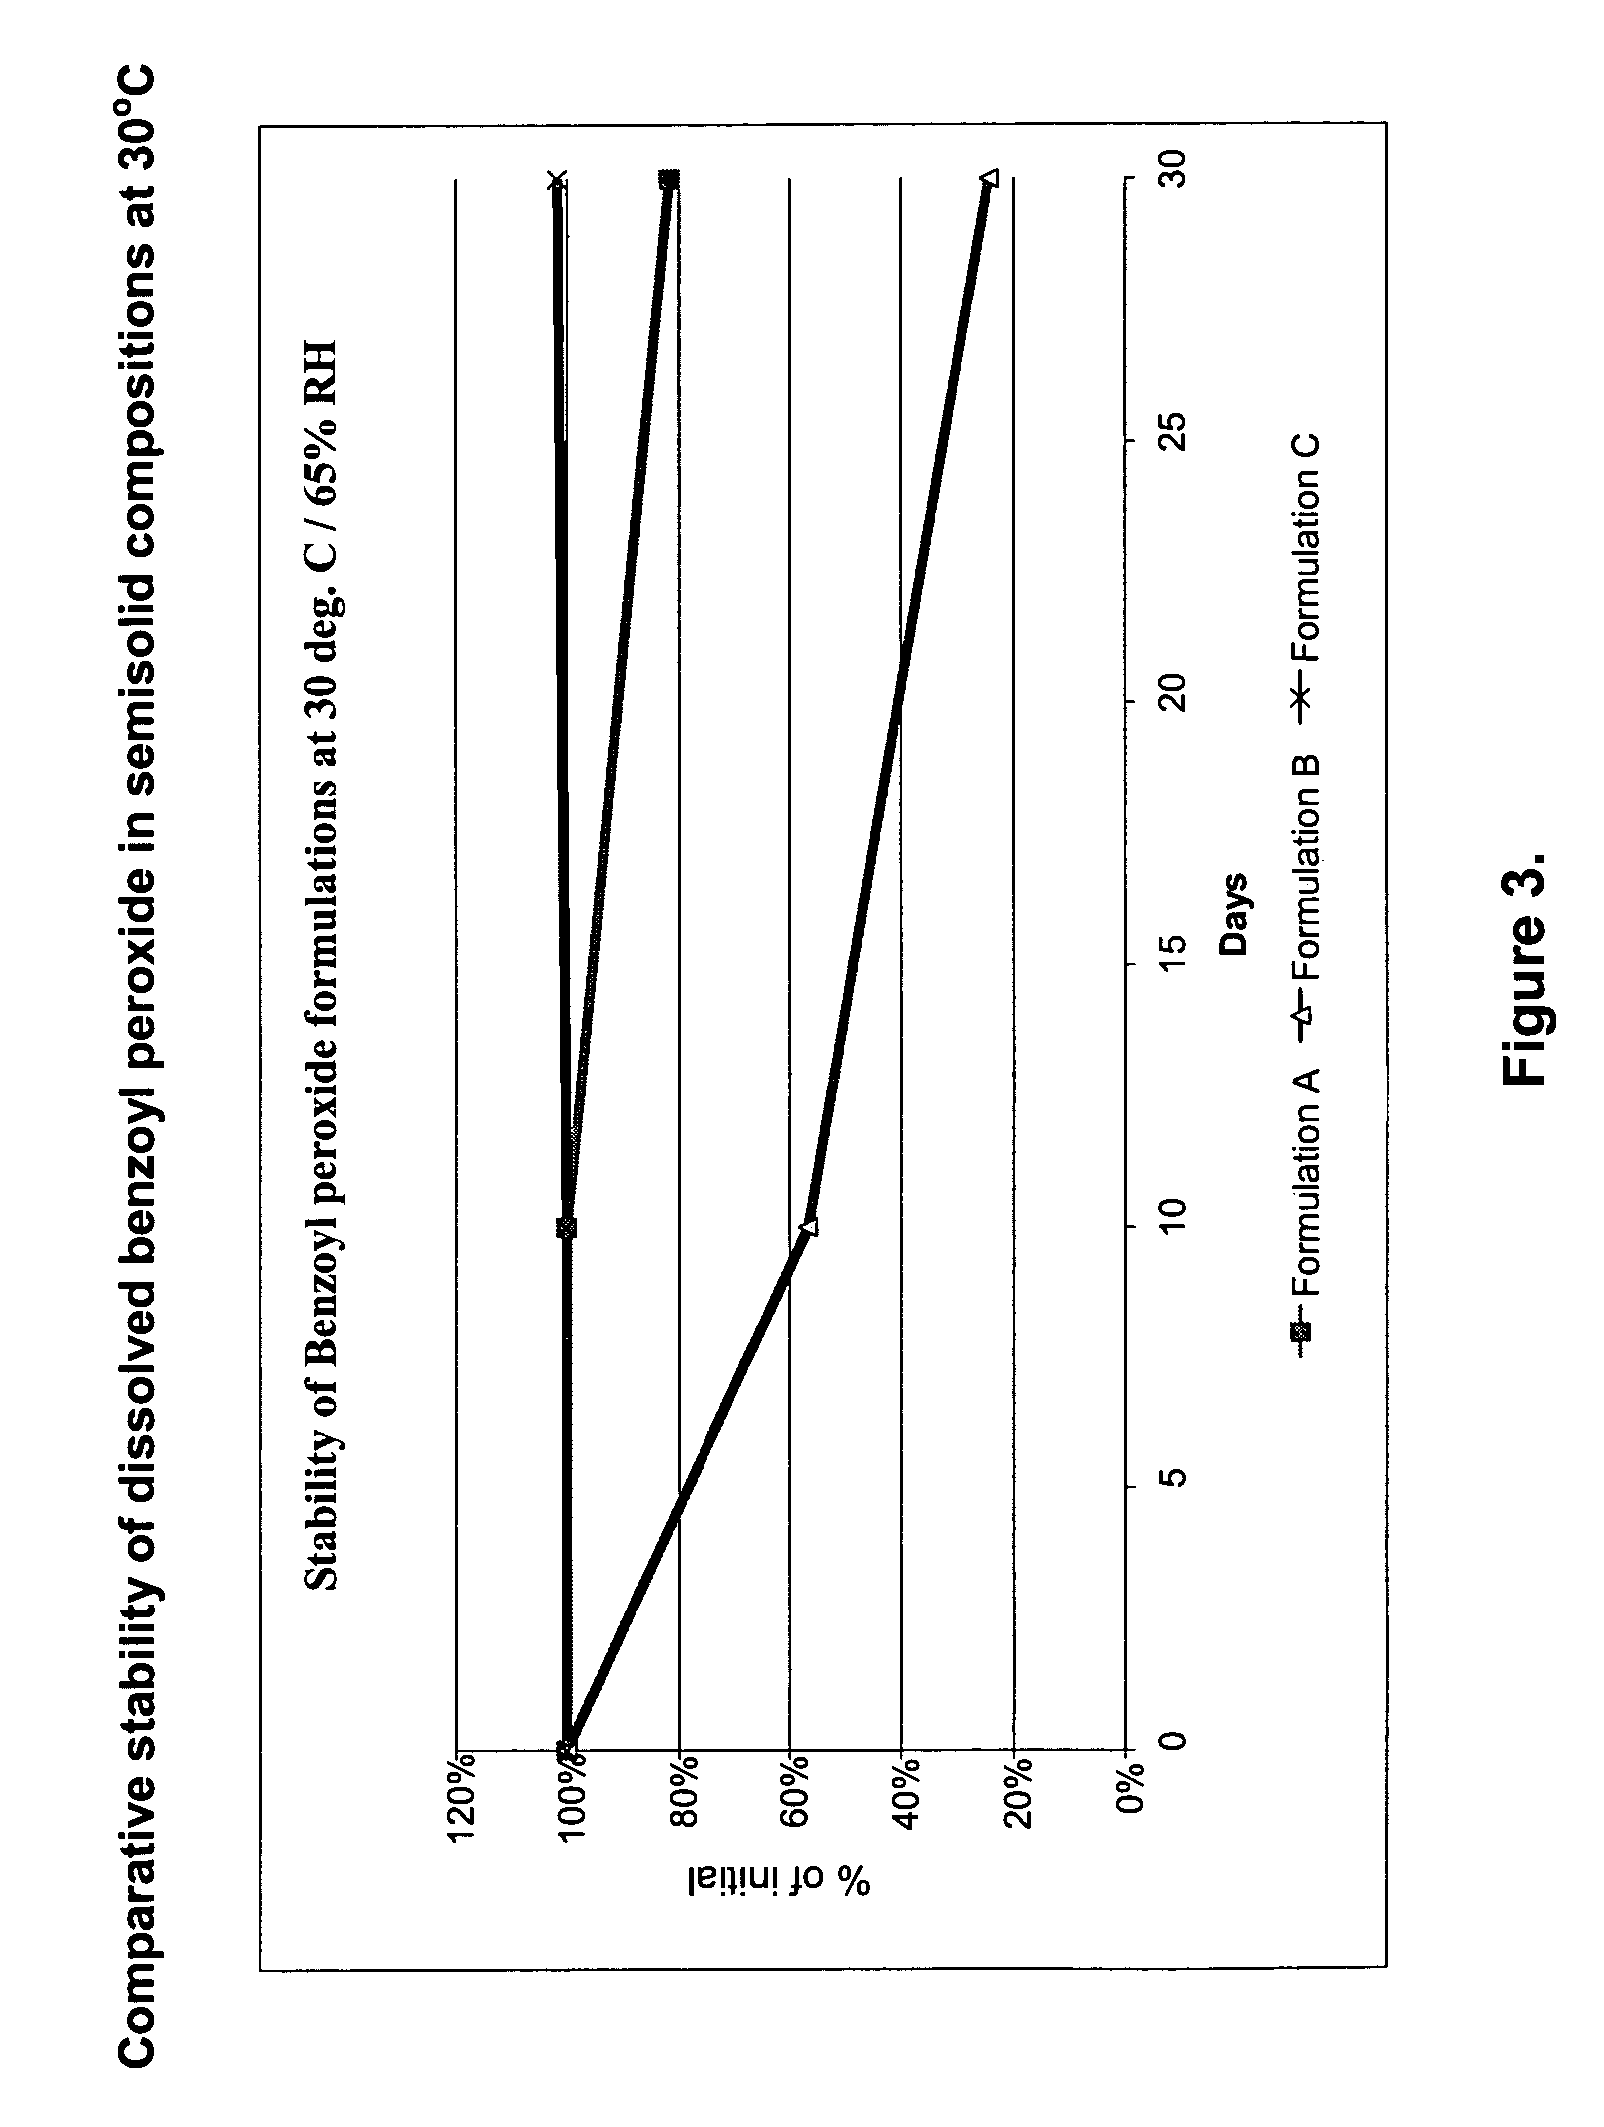 Stabilization of benzoyl peroxide in solution